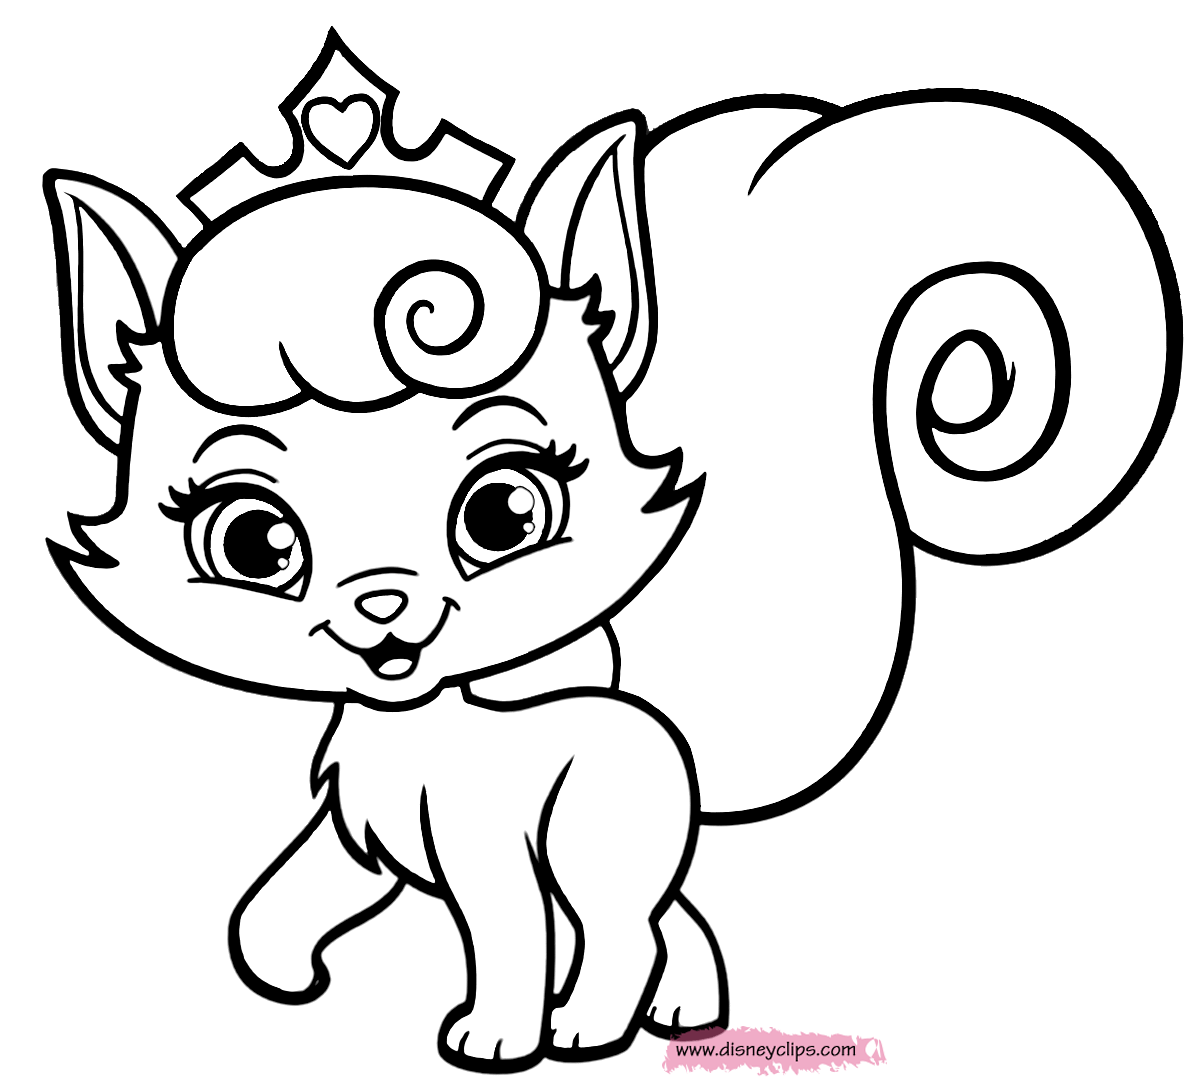 Kittens And Puppies - Coloring Pages for Kids and for Adults